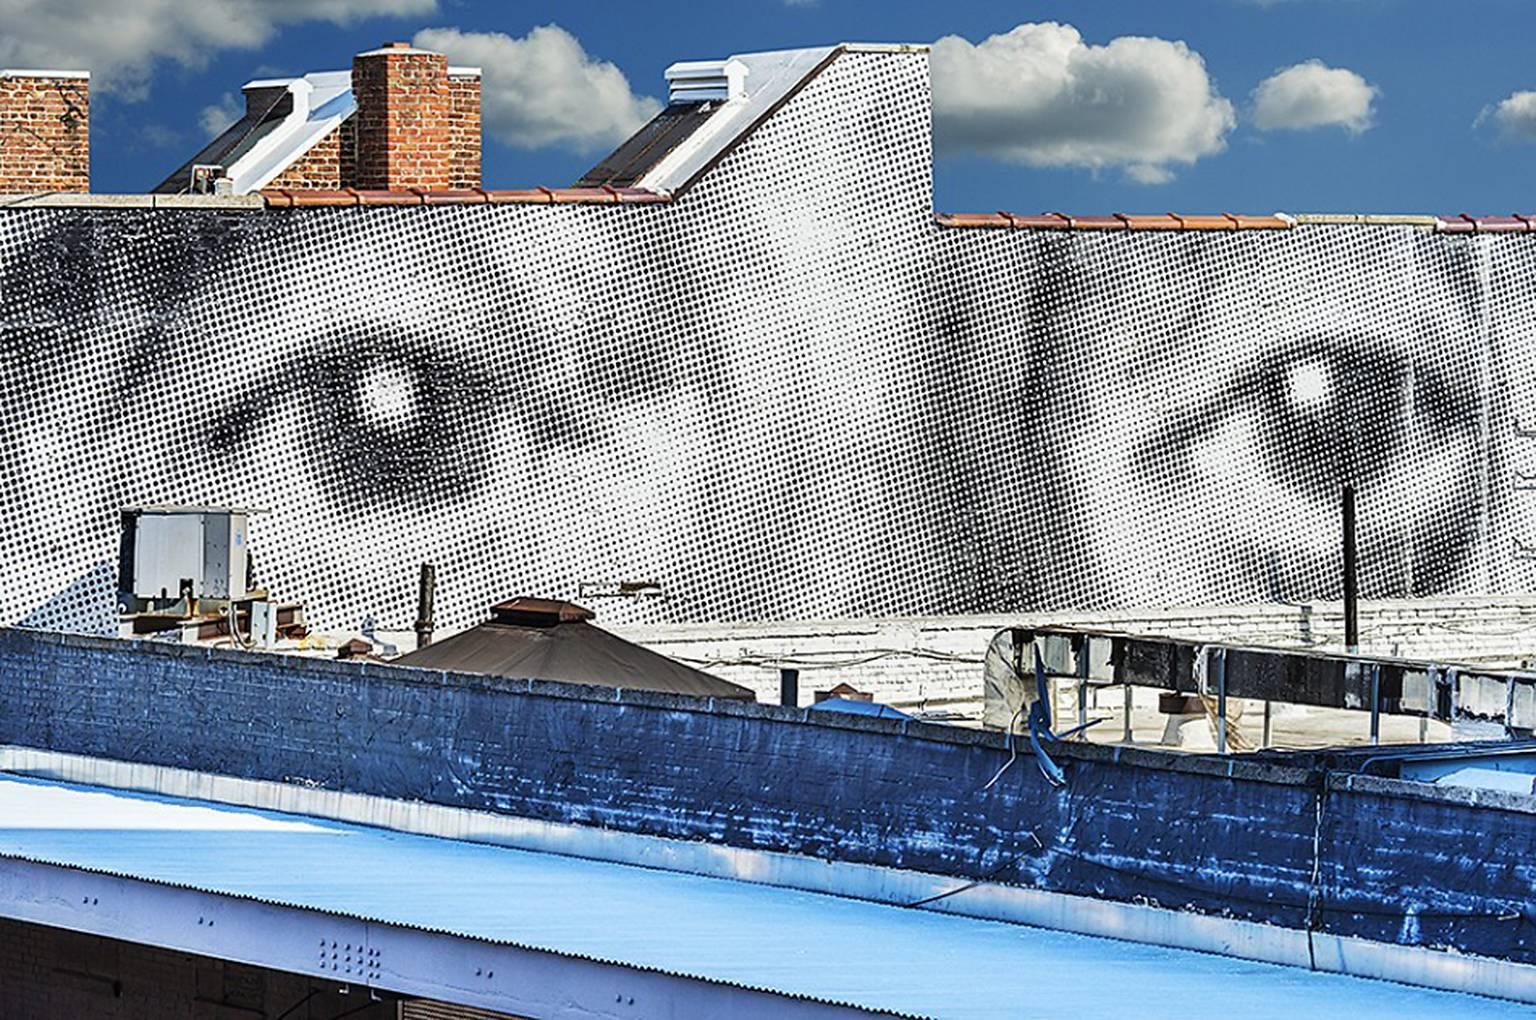 The Wall has Eyes - Street Photography by Mitchell Funk